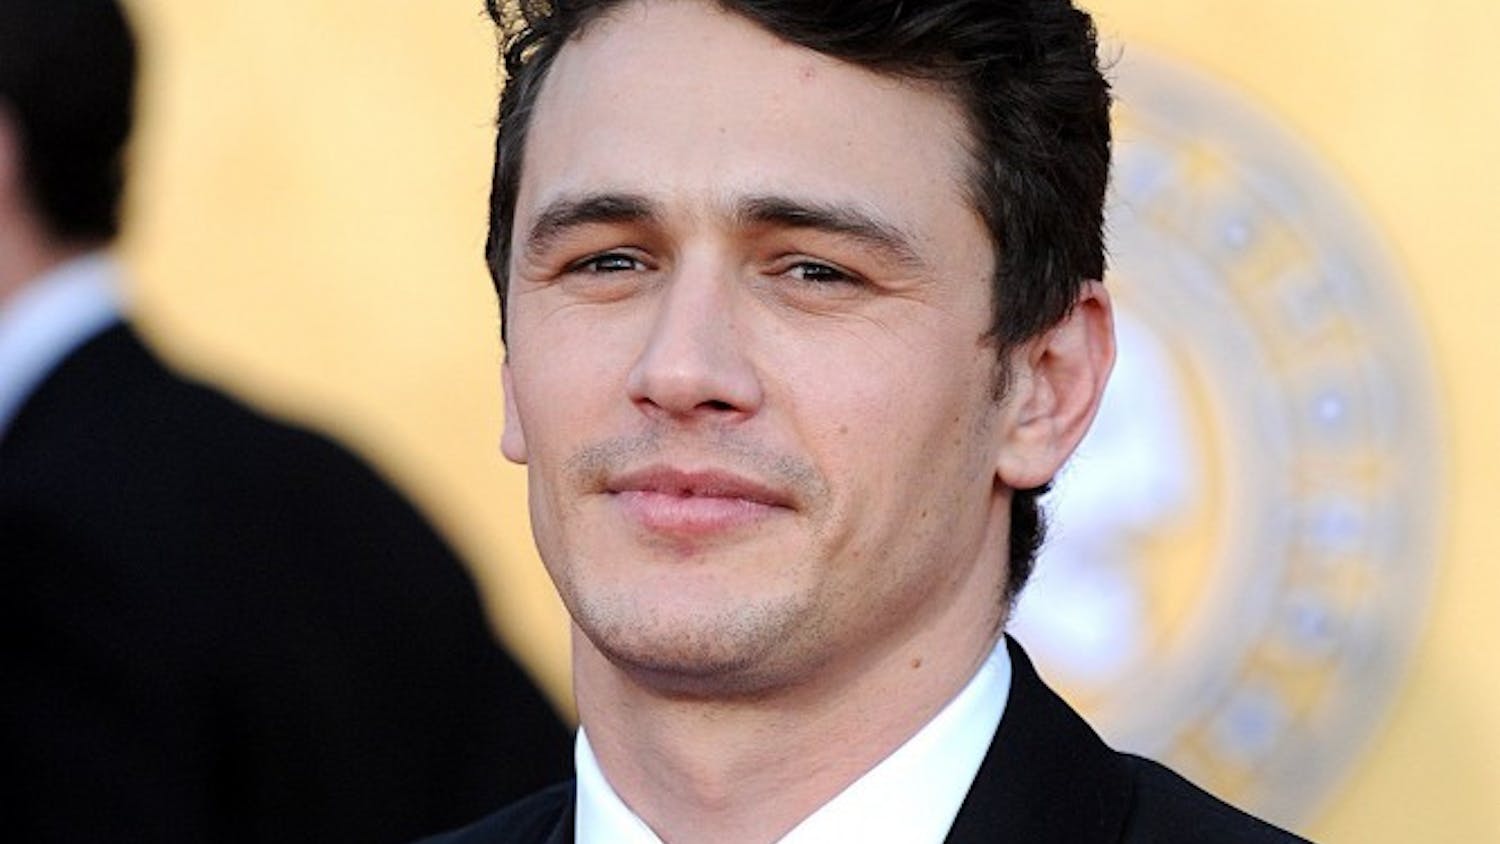 James Franco arrives at the 17th Annual Screen Actors Guild Awards at the Shrine Auditorium in Los Angeles, California, on Sunday, January 30, 2011. (Lionel Hahn/Abaca Press/MCT)